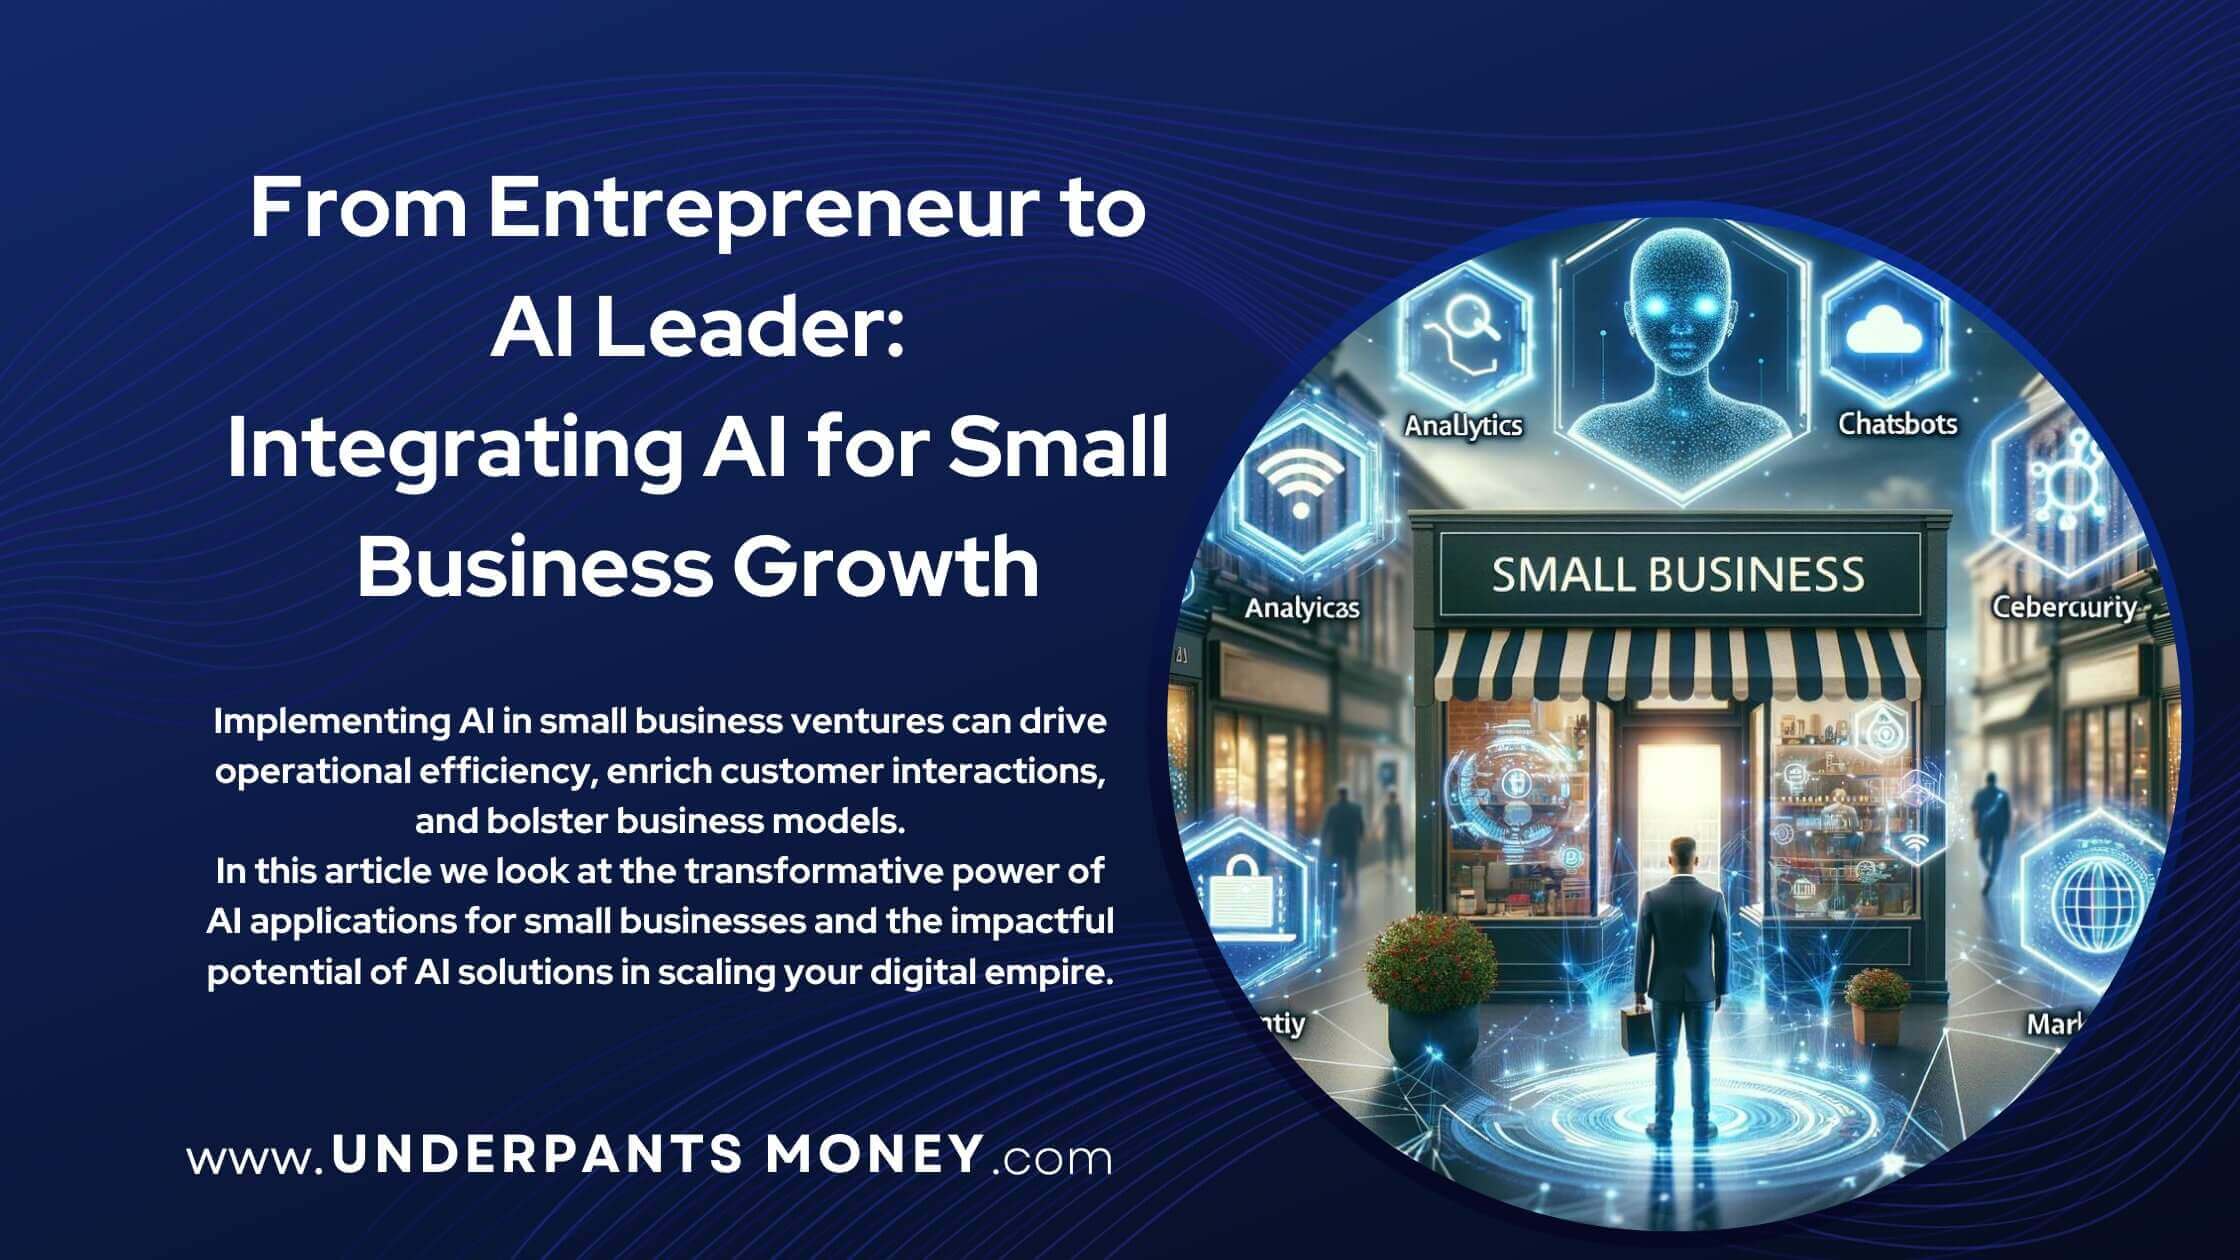 Integrating AI for small business title and subtext on blue with image of man standing in front of digital small business